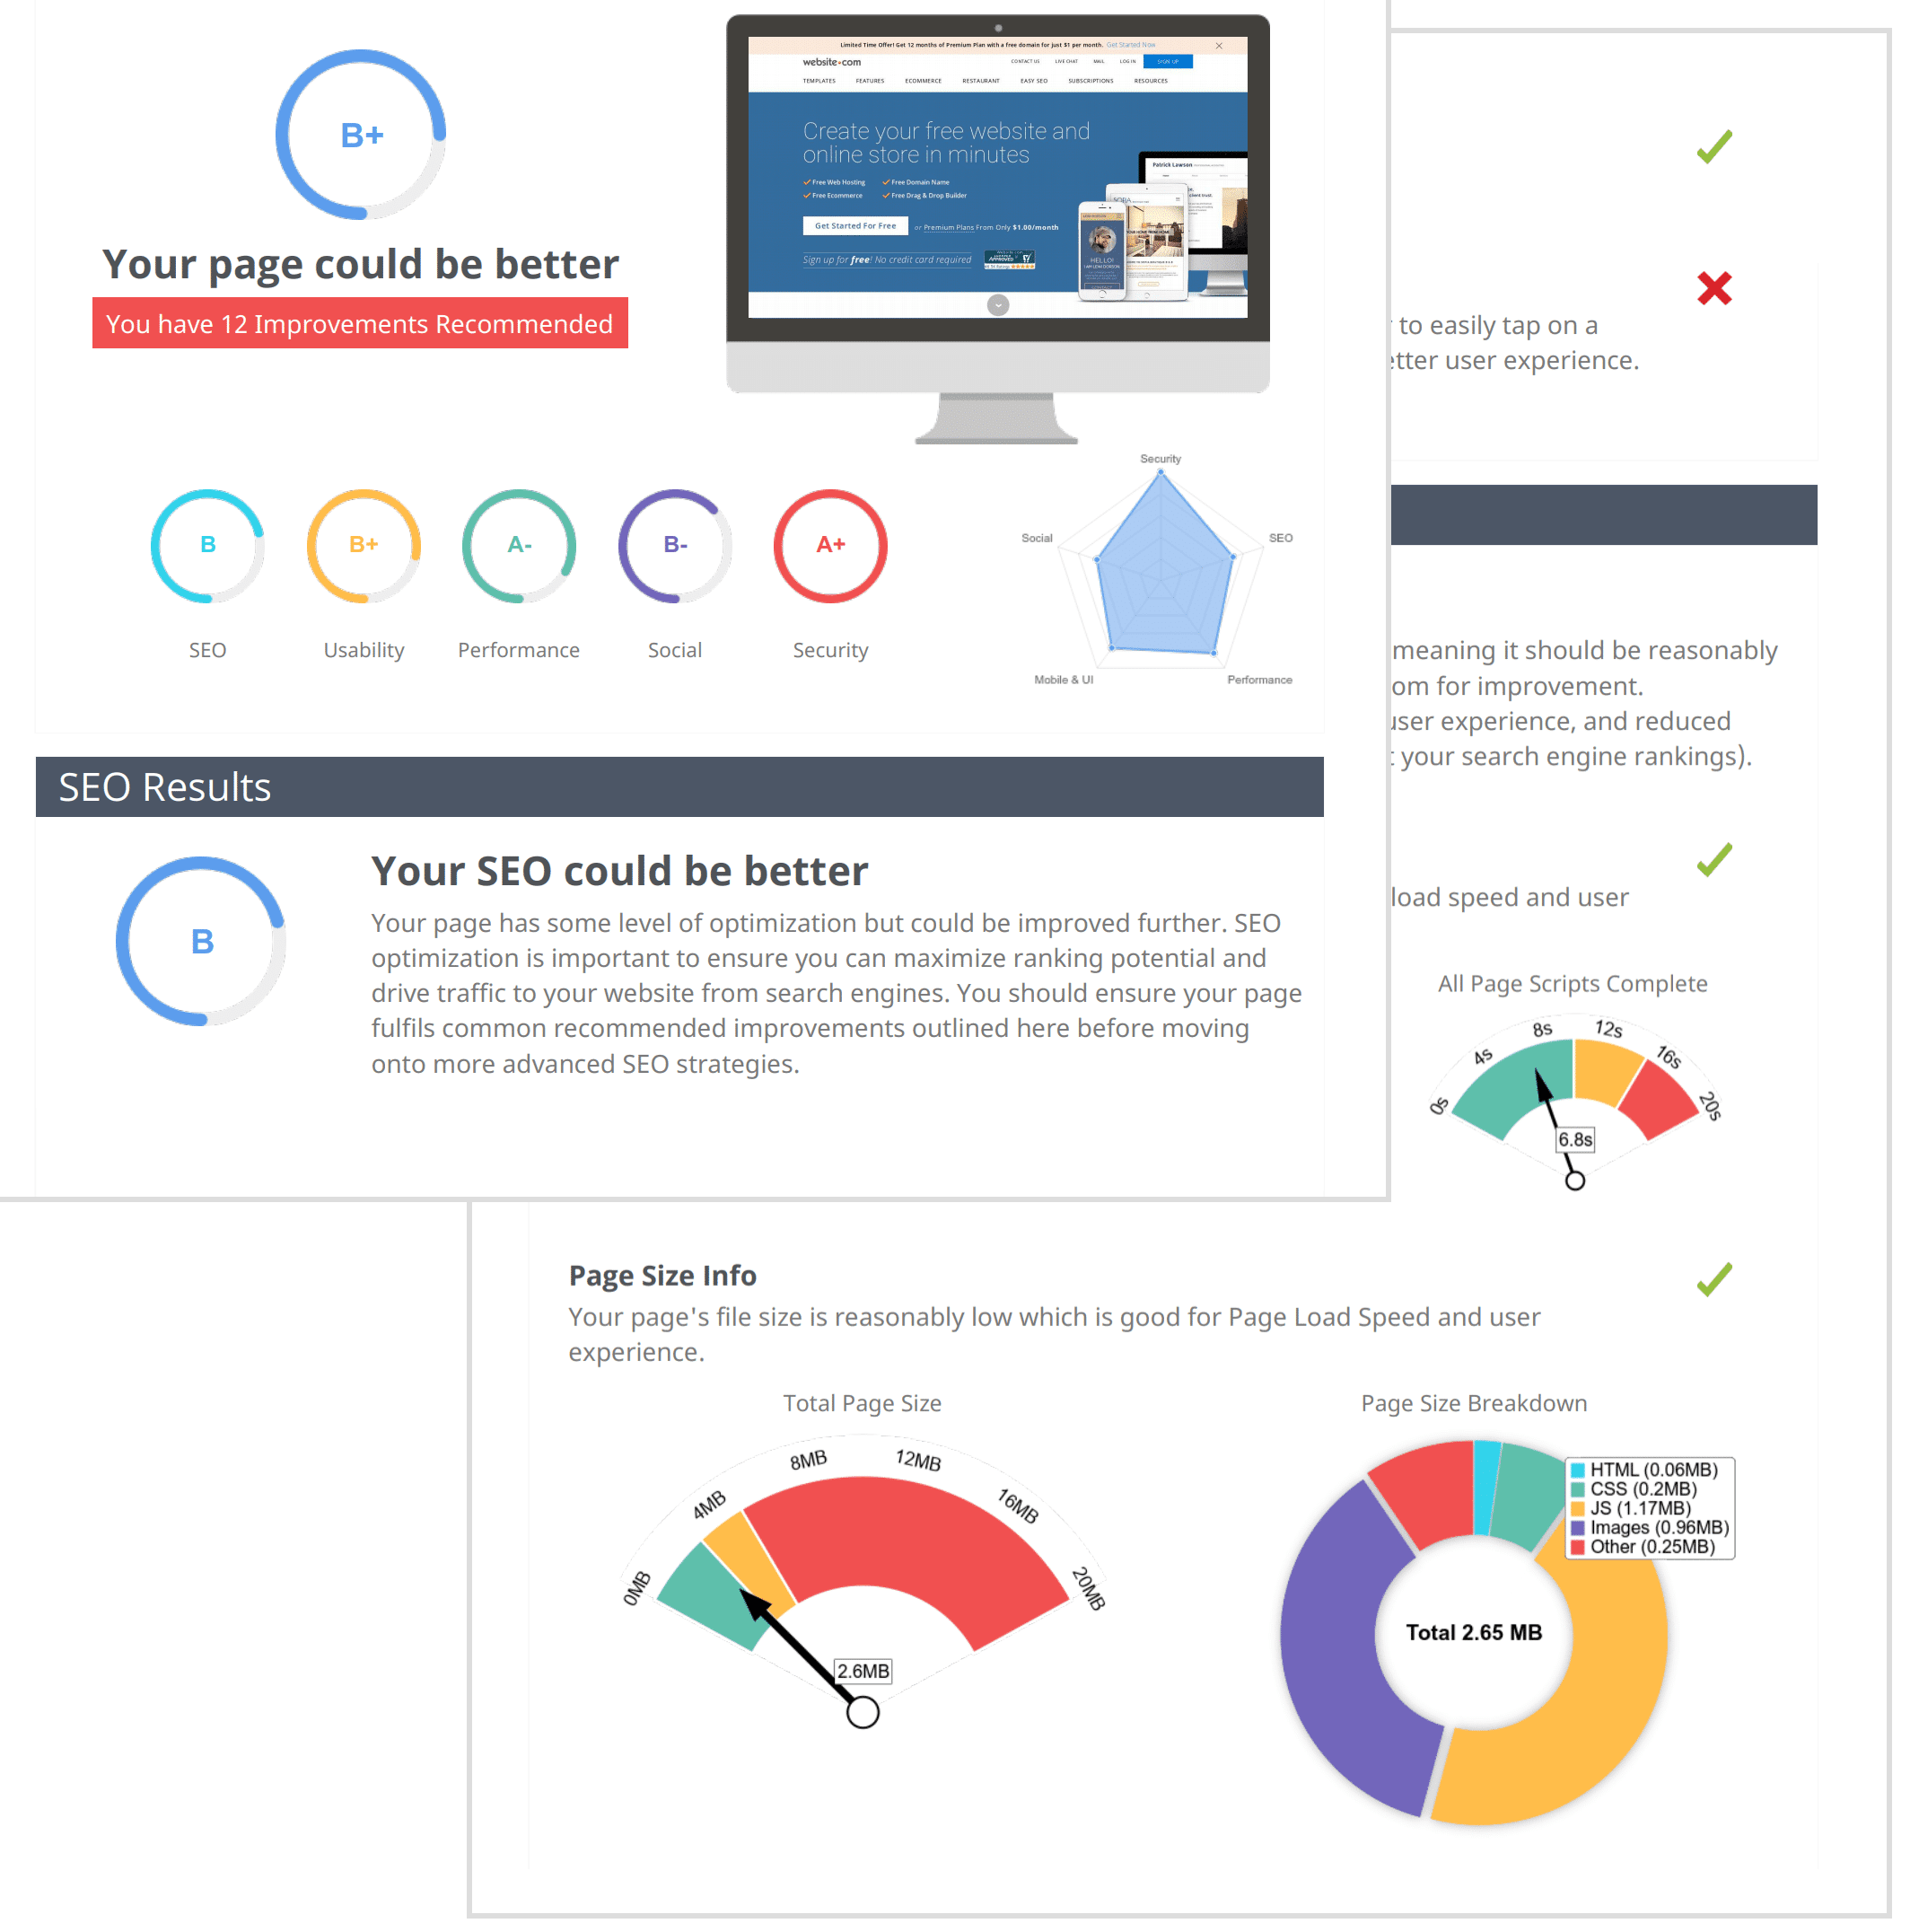 Website audit report included with web design services in San Diego